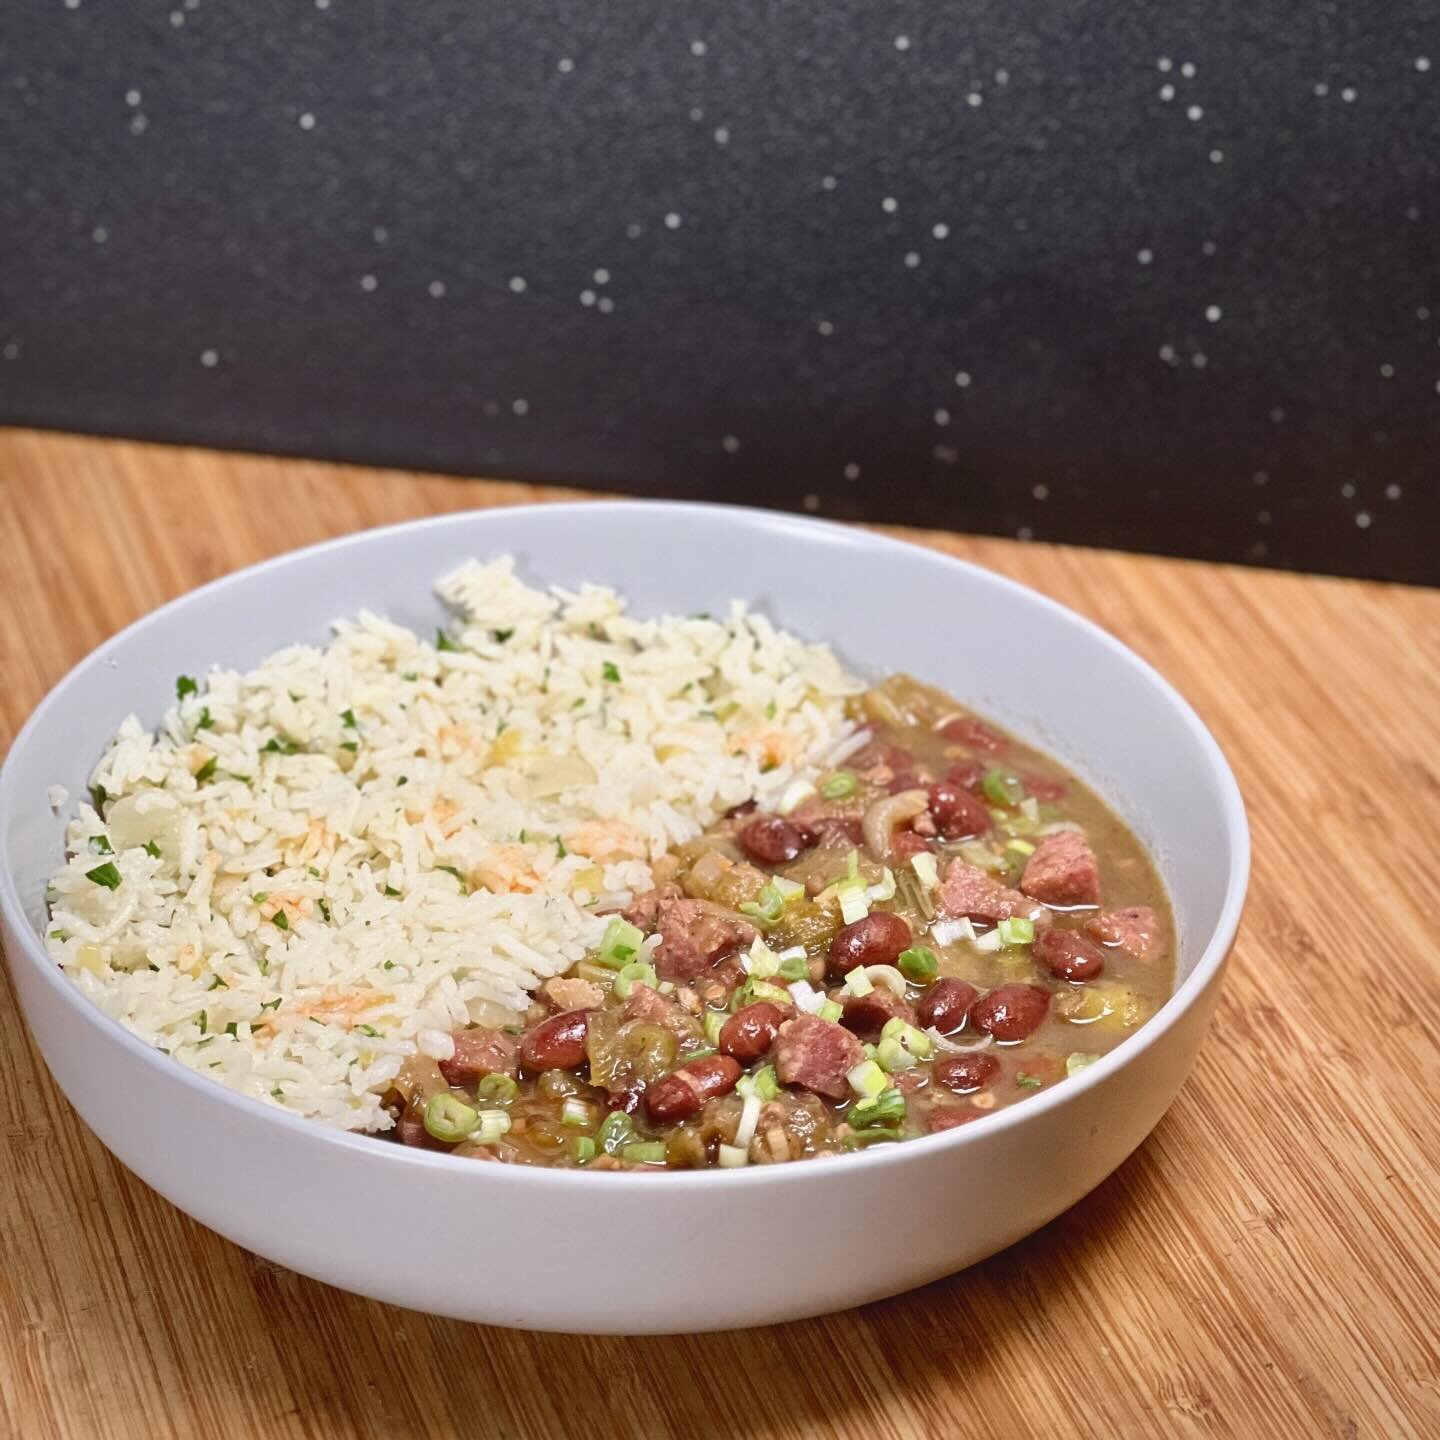 9/100: Red beans and rice &ldquo;gumbo&rdquo; with rice pilaf (Pickles, Pigs &amp; Whiskey, John Currence)

Sometimes I flip through the books aimlessly, looking for anything that looks interesting. This time, I knew exactly what I wanted: Red beans 